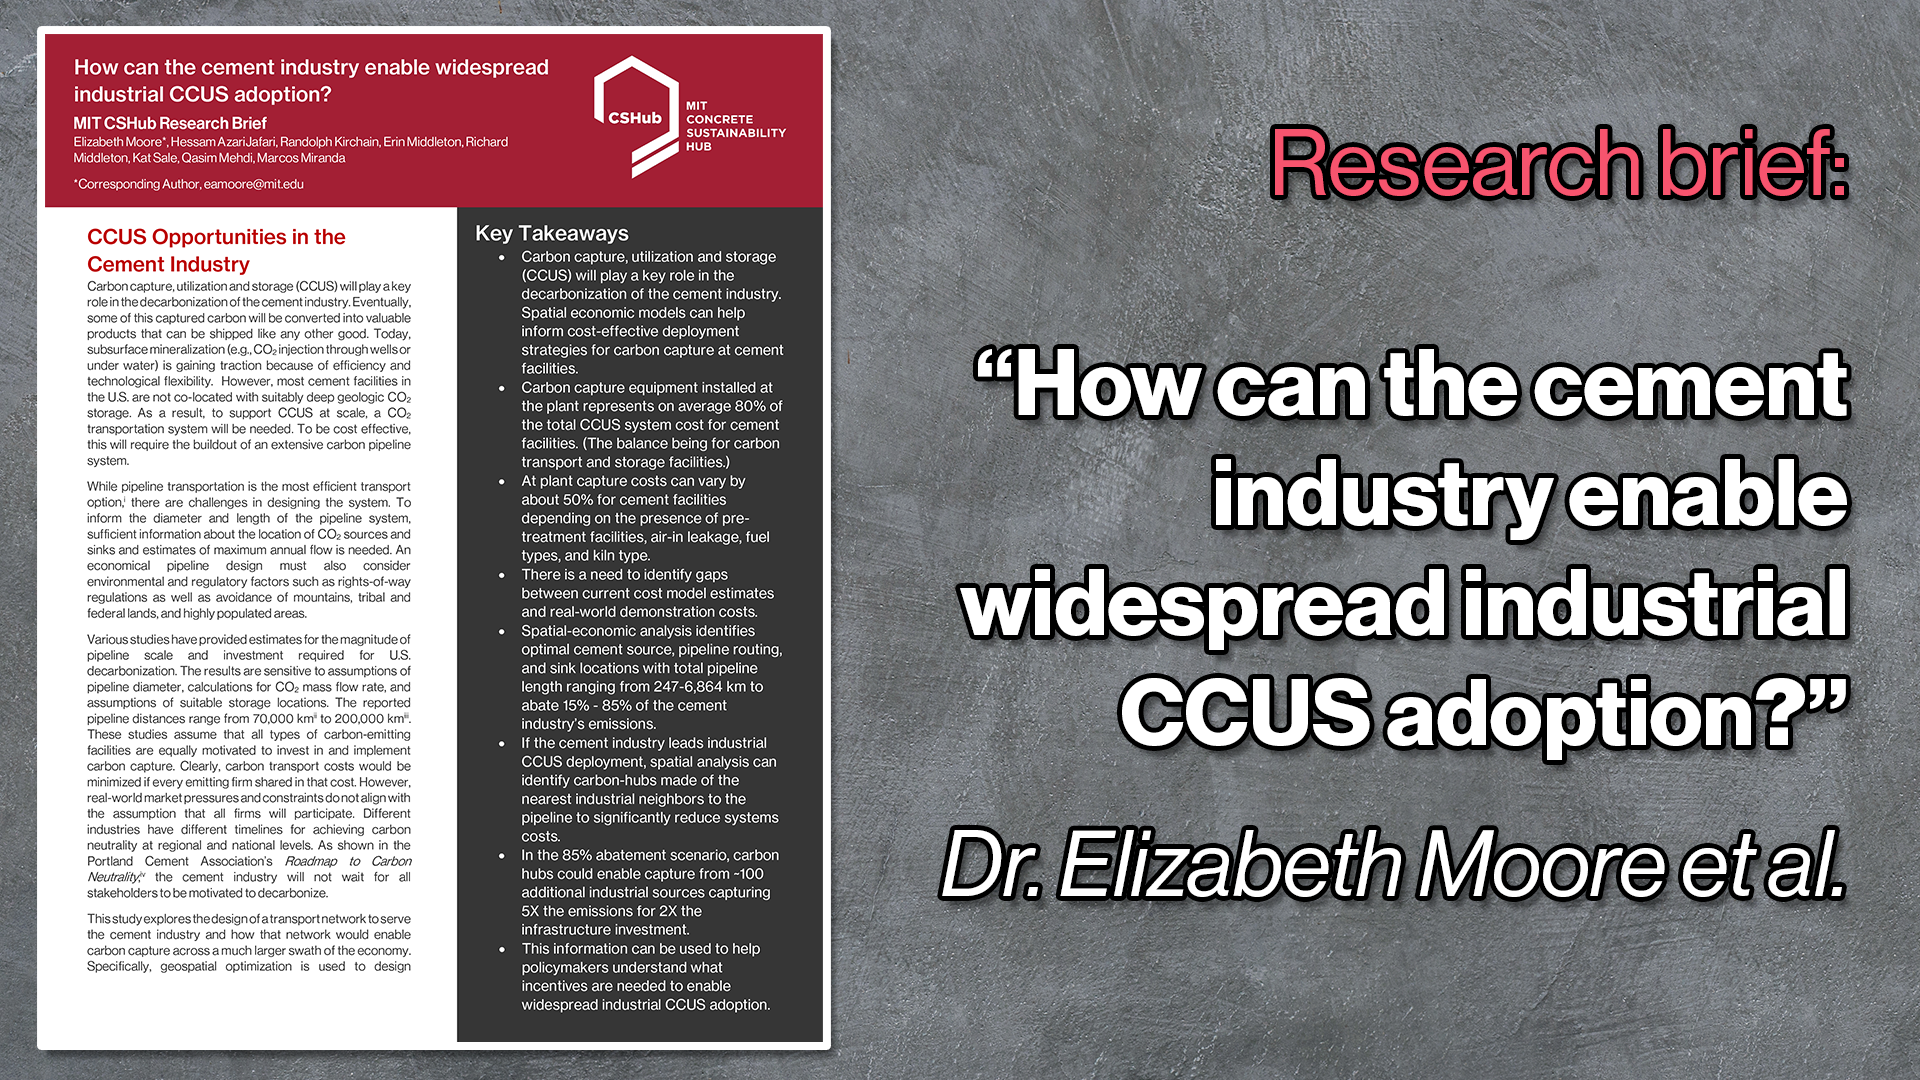 Brief: How can the cement industry enable widespread industrial CCUS adoption?